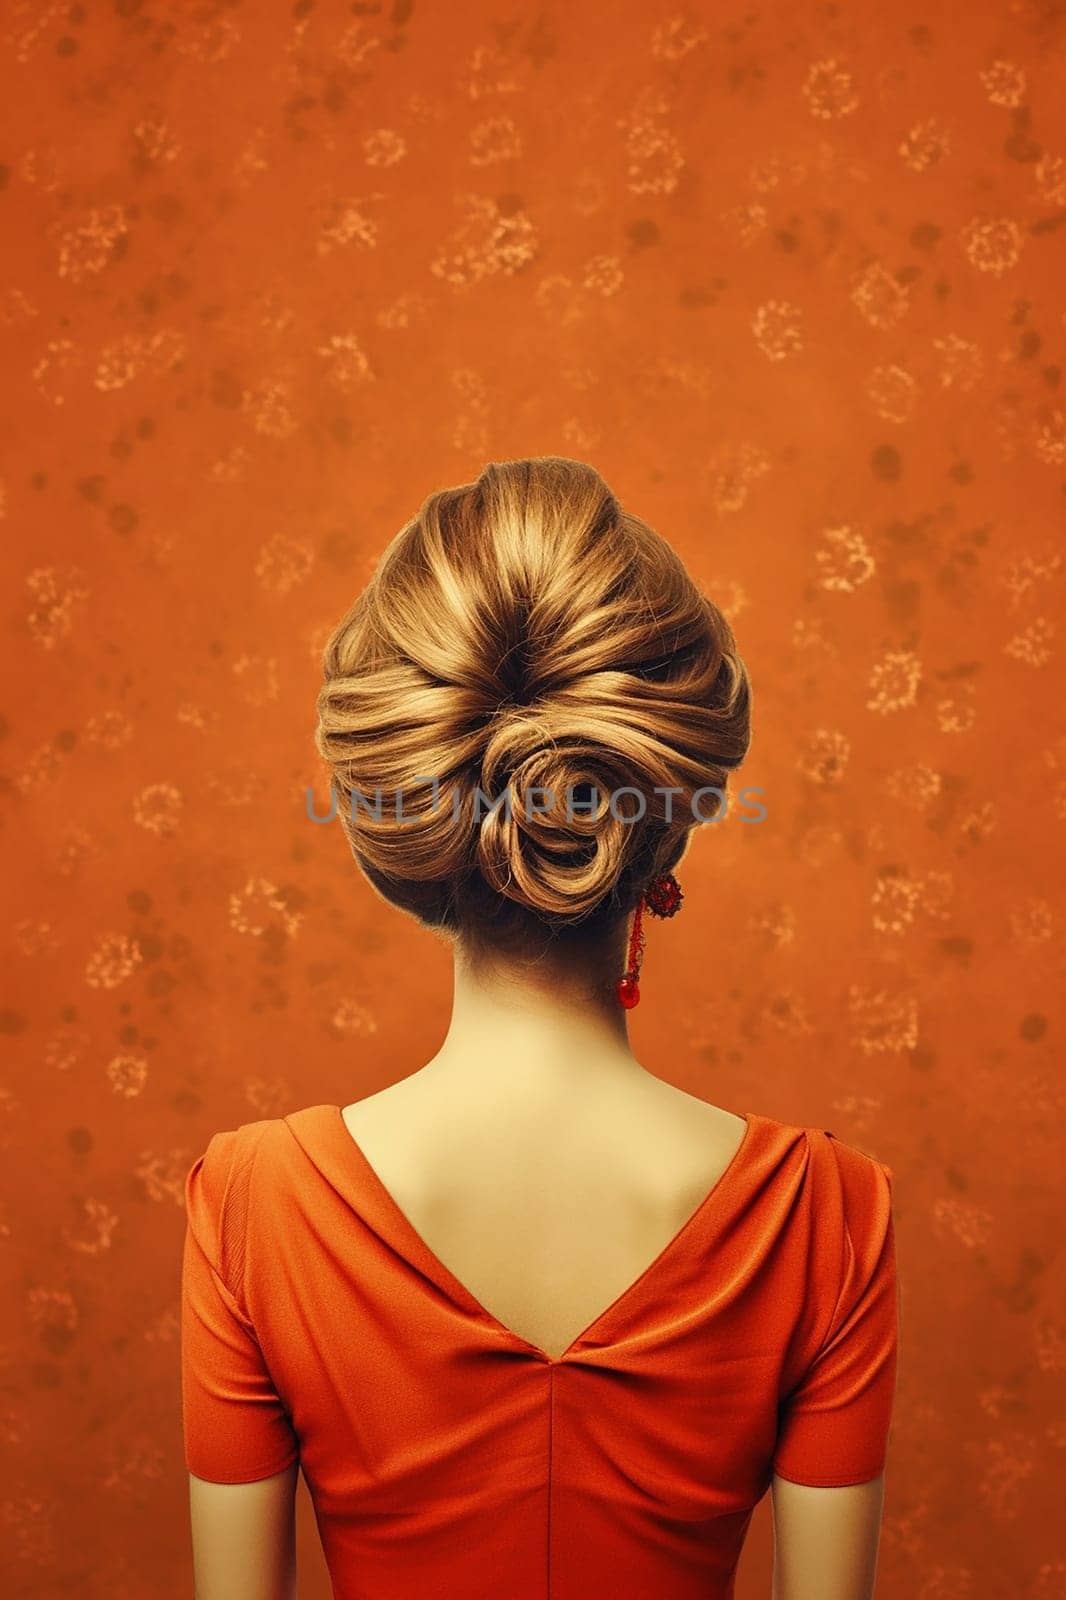 Elegant hairstyle on a woman in an orange dress against a textured backdrop